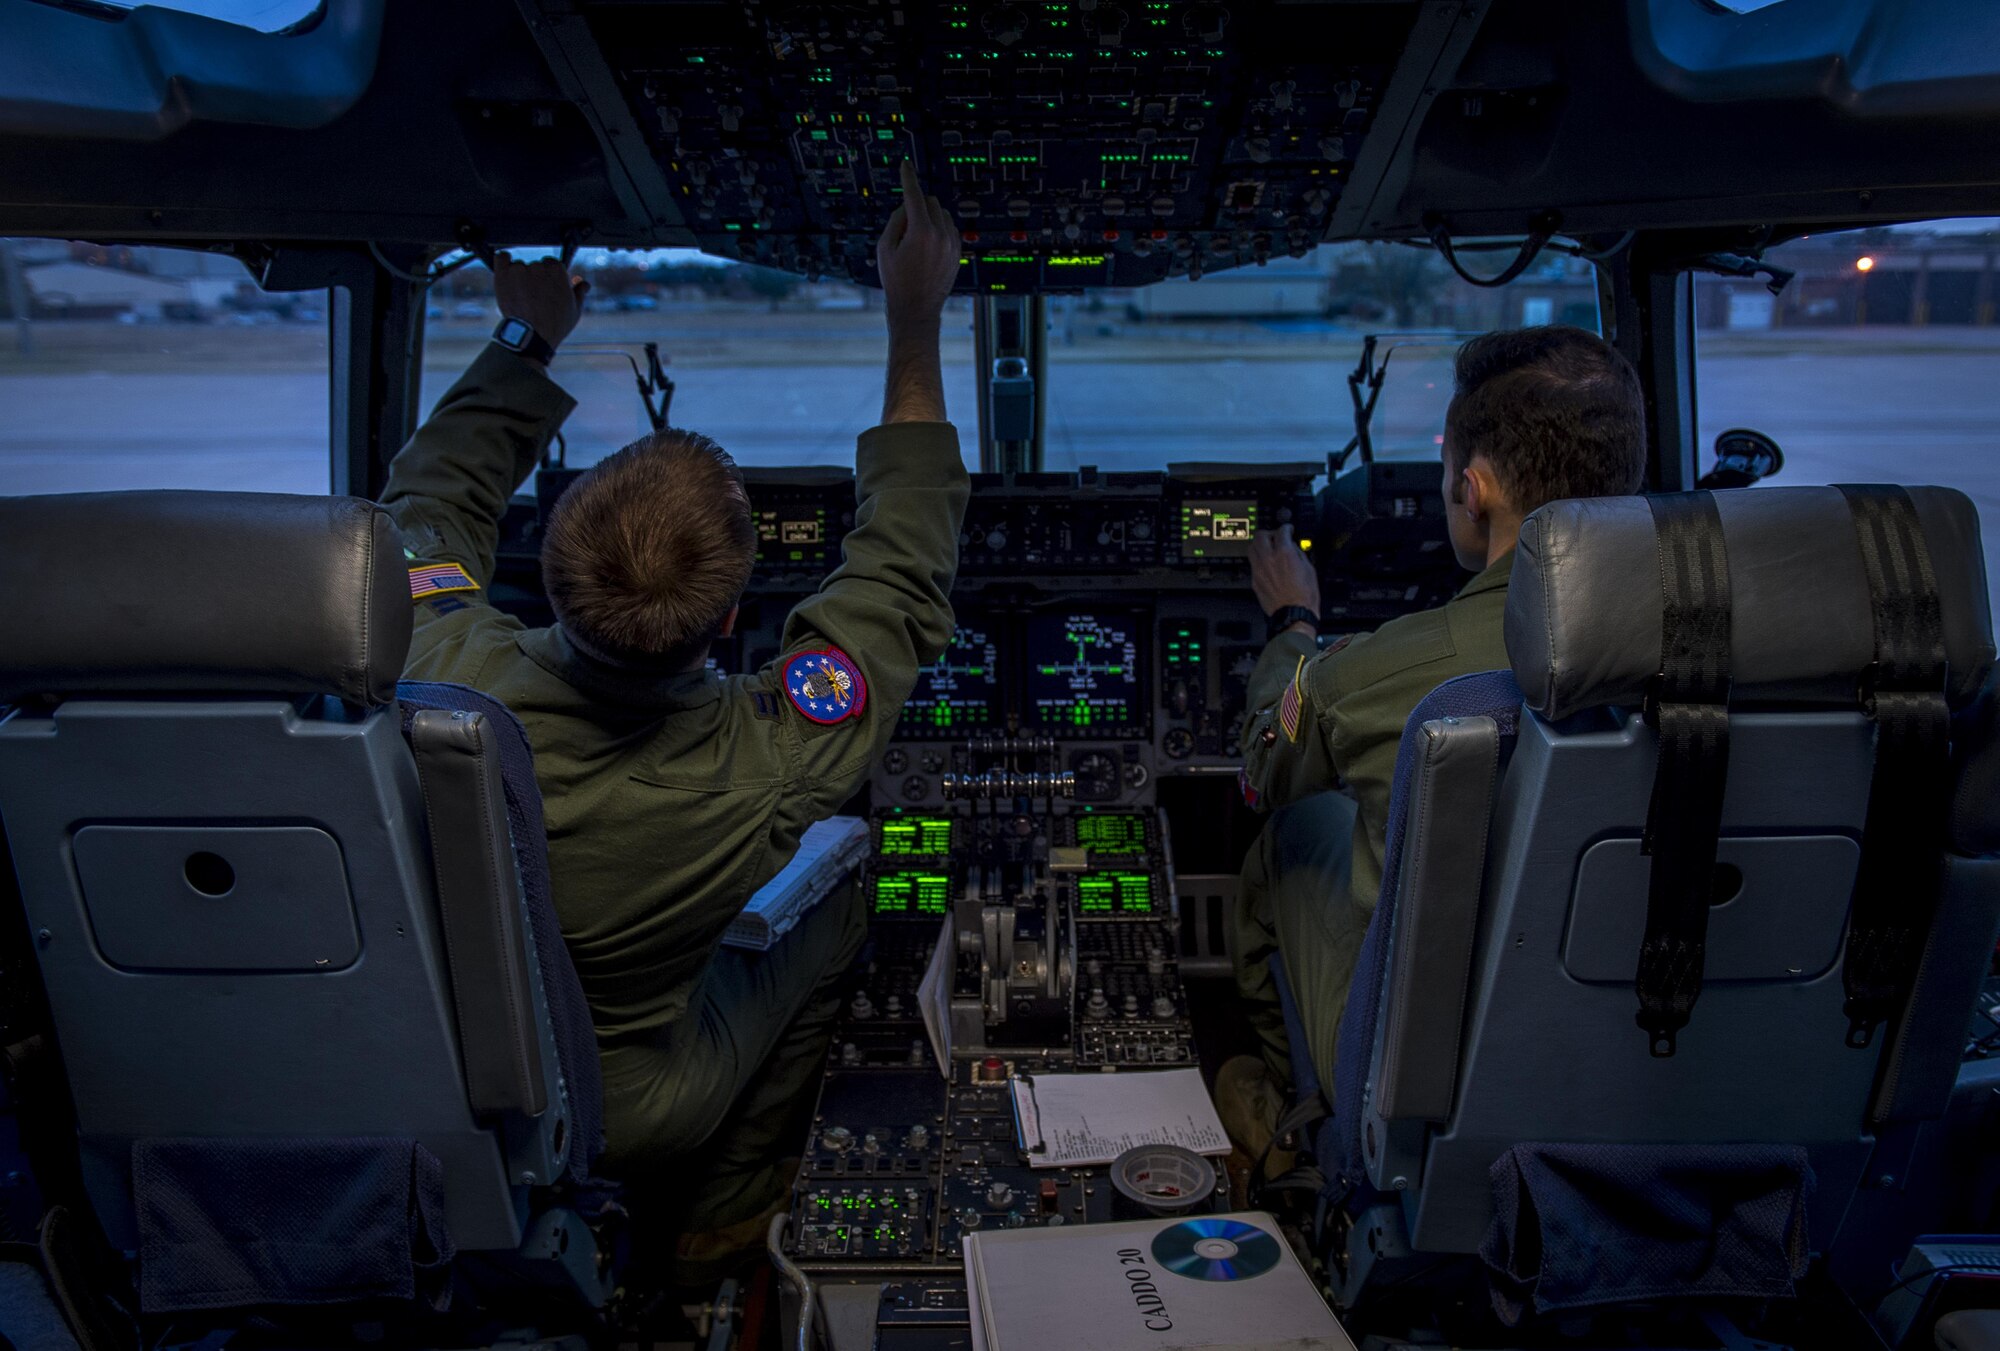 U.S. Air Force Capt. Eric Miller, an instructor pilot with the 97th Training Squadron and Maj. Chris Black, an instructor pilot with the 58th Airlift Squadron, perform pre-flight checks in a C-17 Globemaster III during the Altus Quarterly Exercise (ALTEX), Nov. 16, 2017 at Altus Air Force Base, Okla.